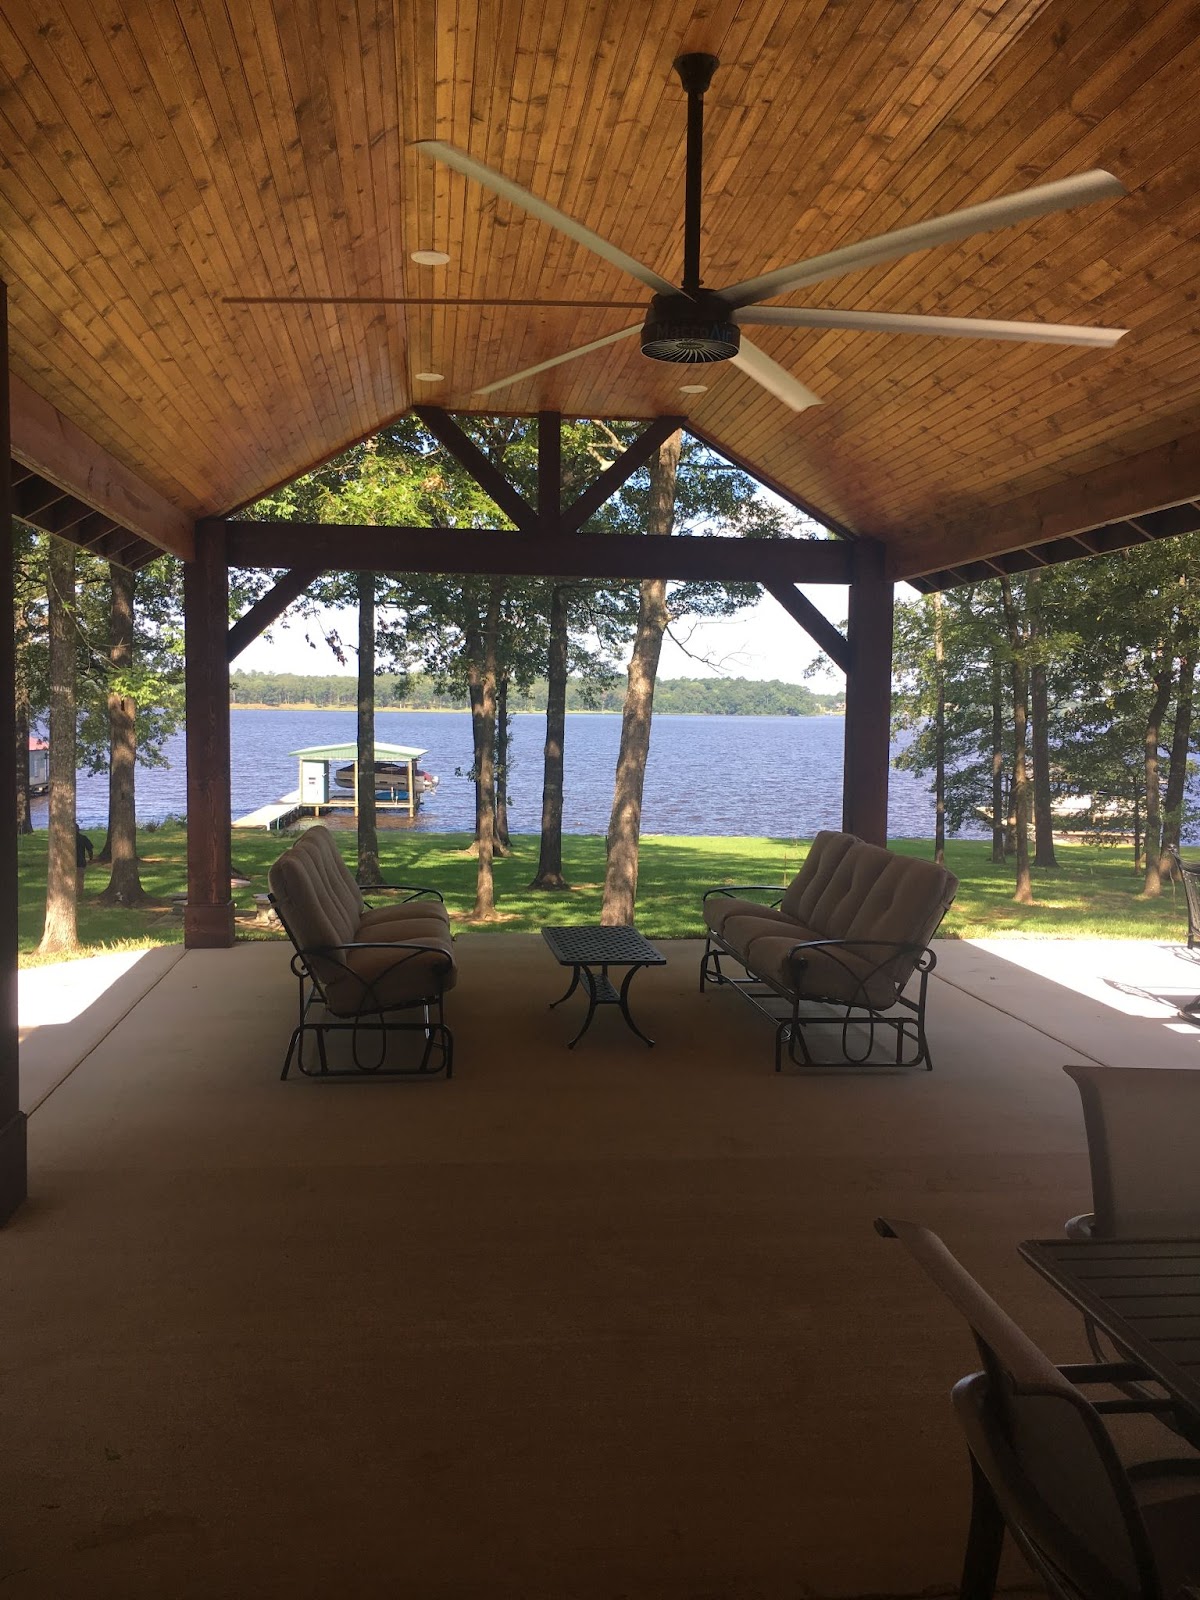 Large Outdoor Ceiling Fan Buyer's Guide